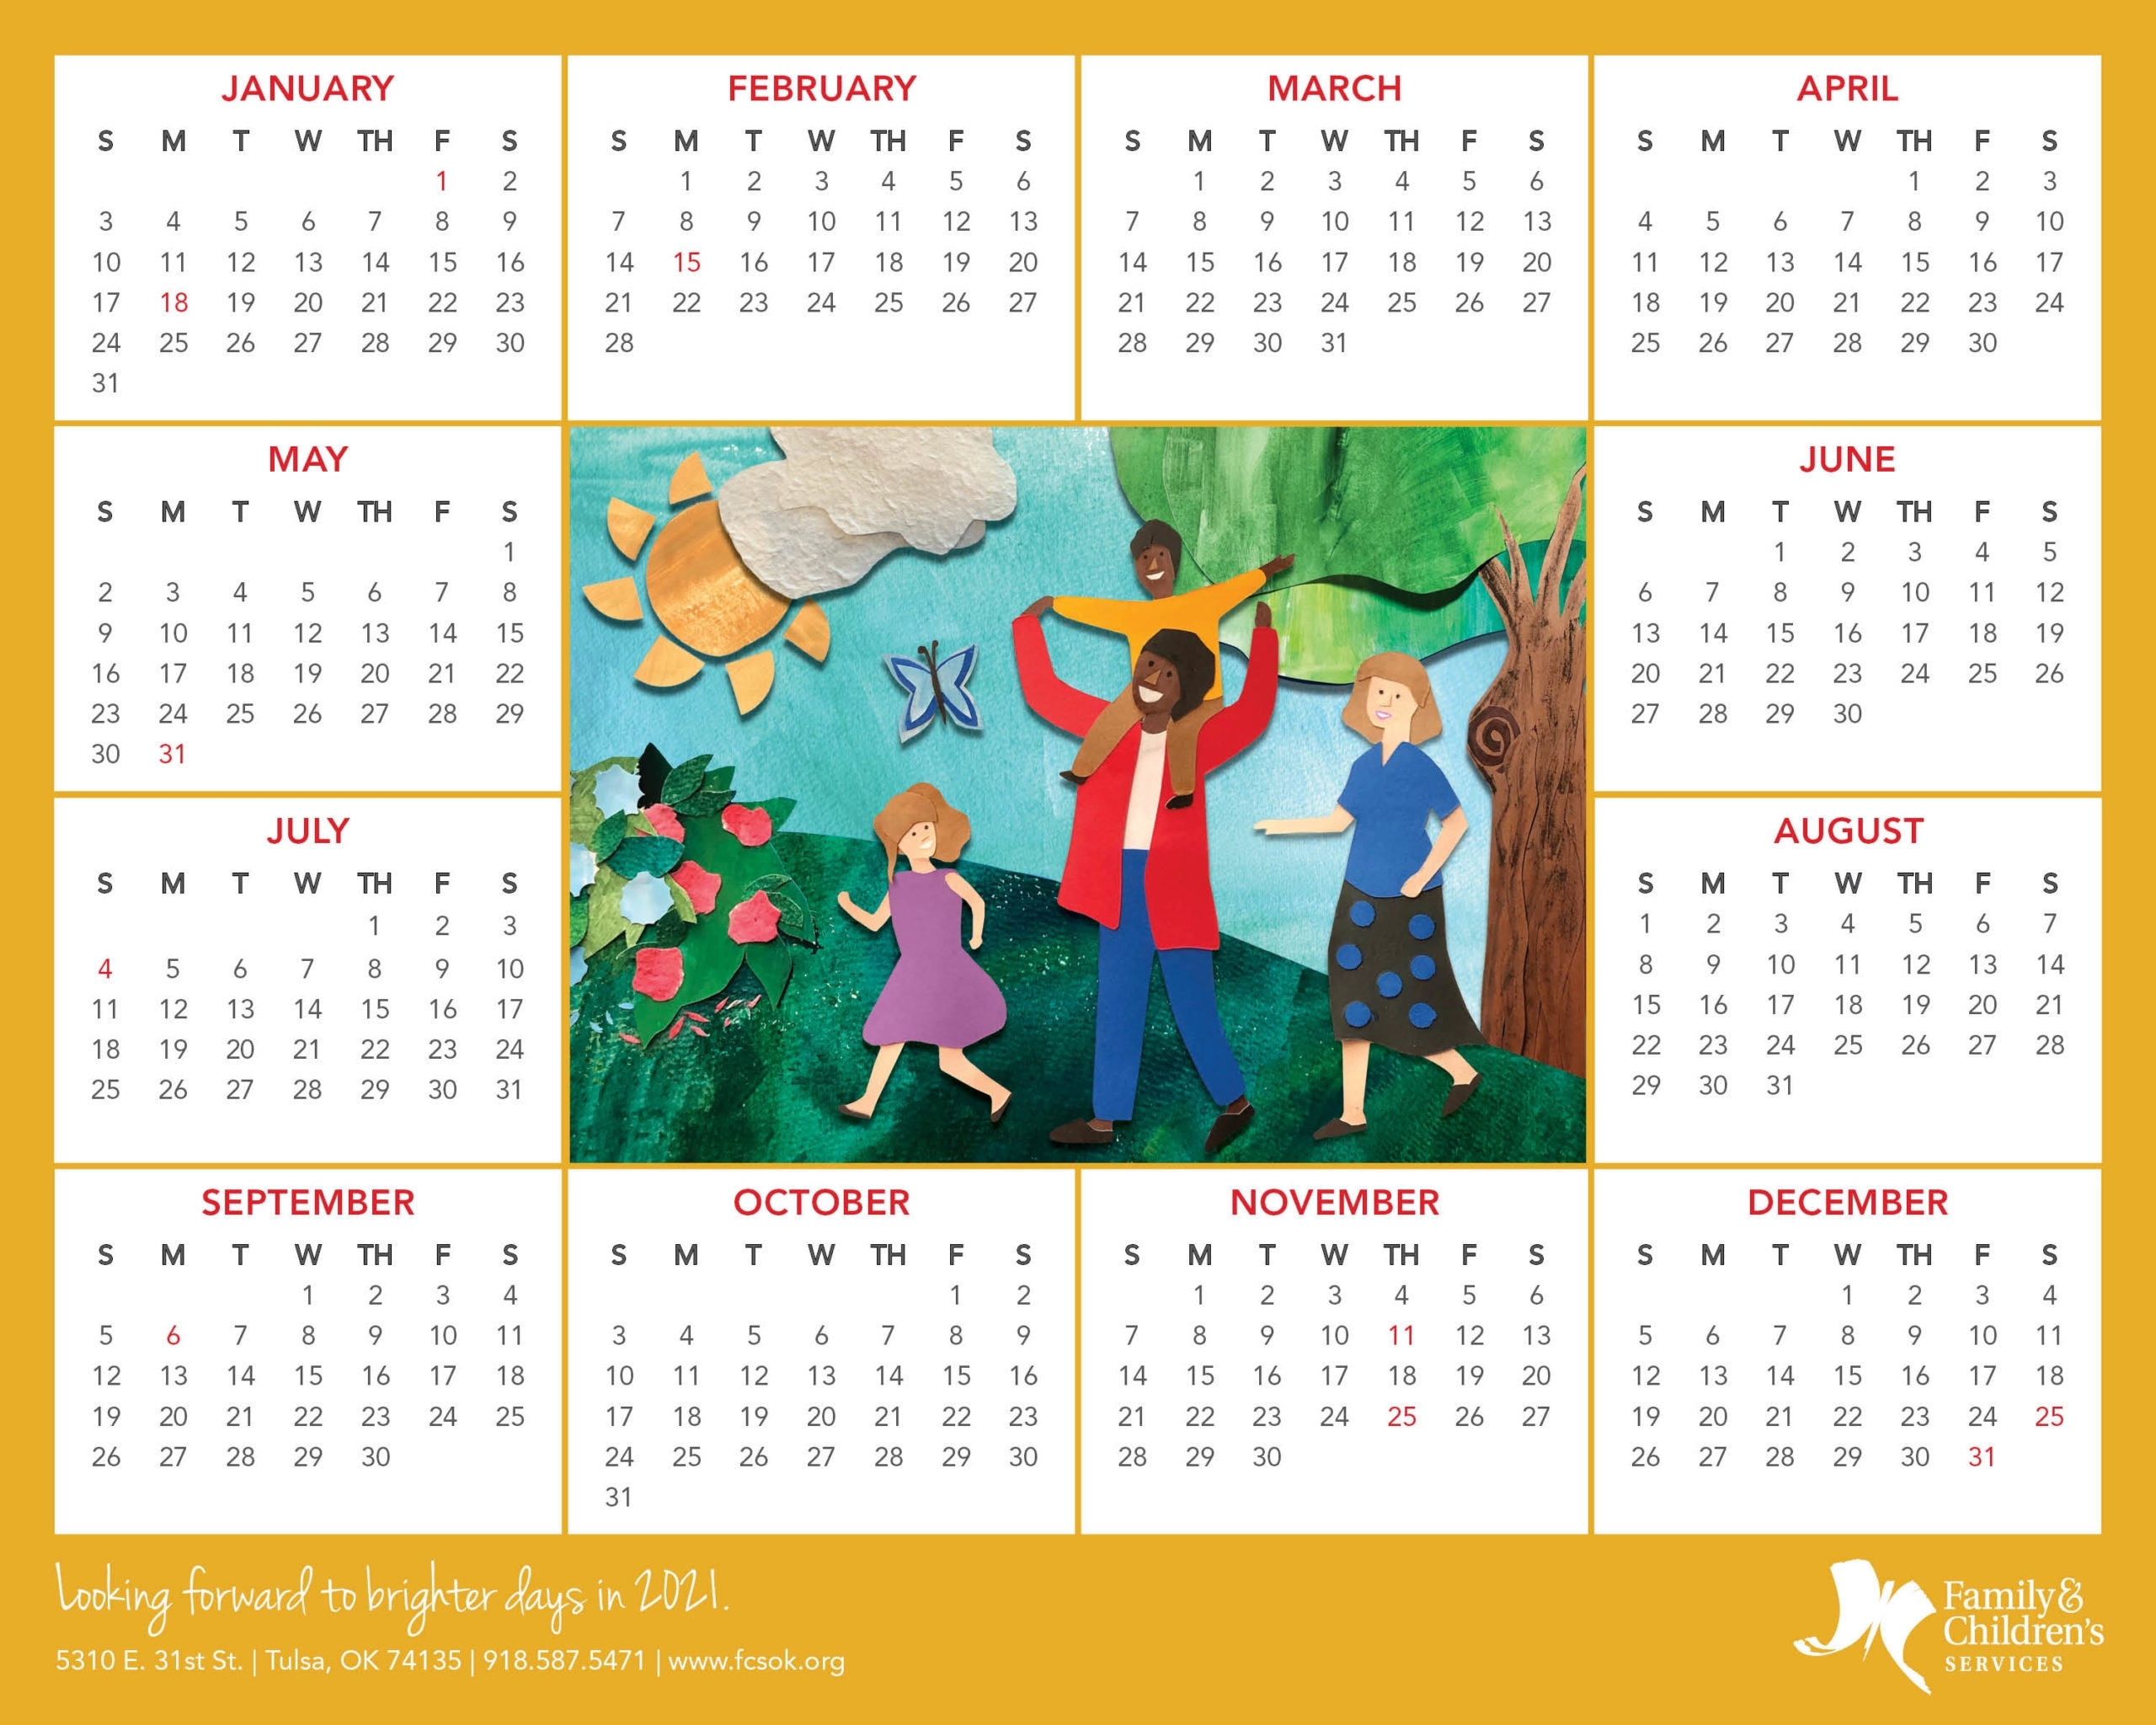 Download Your 2021 Calendar, Our Gift To You - Family